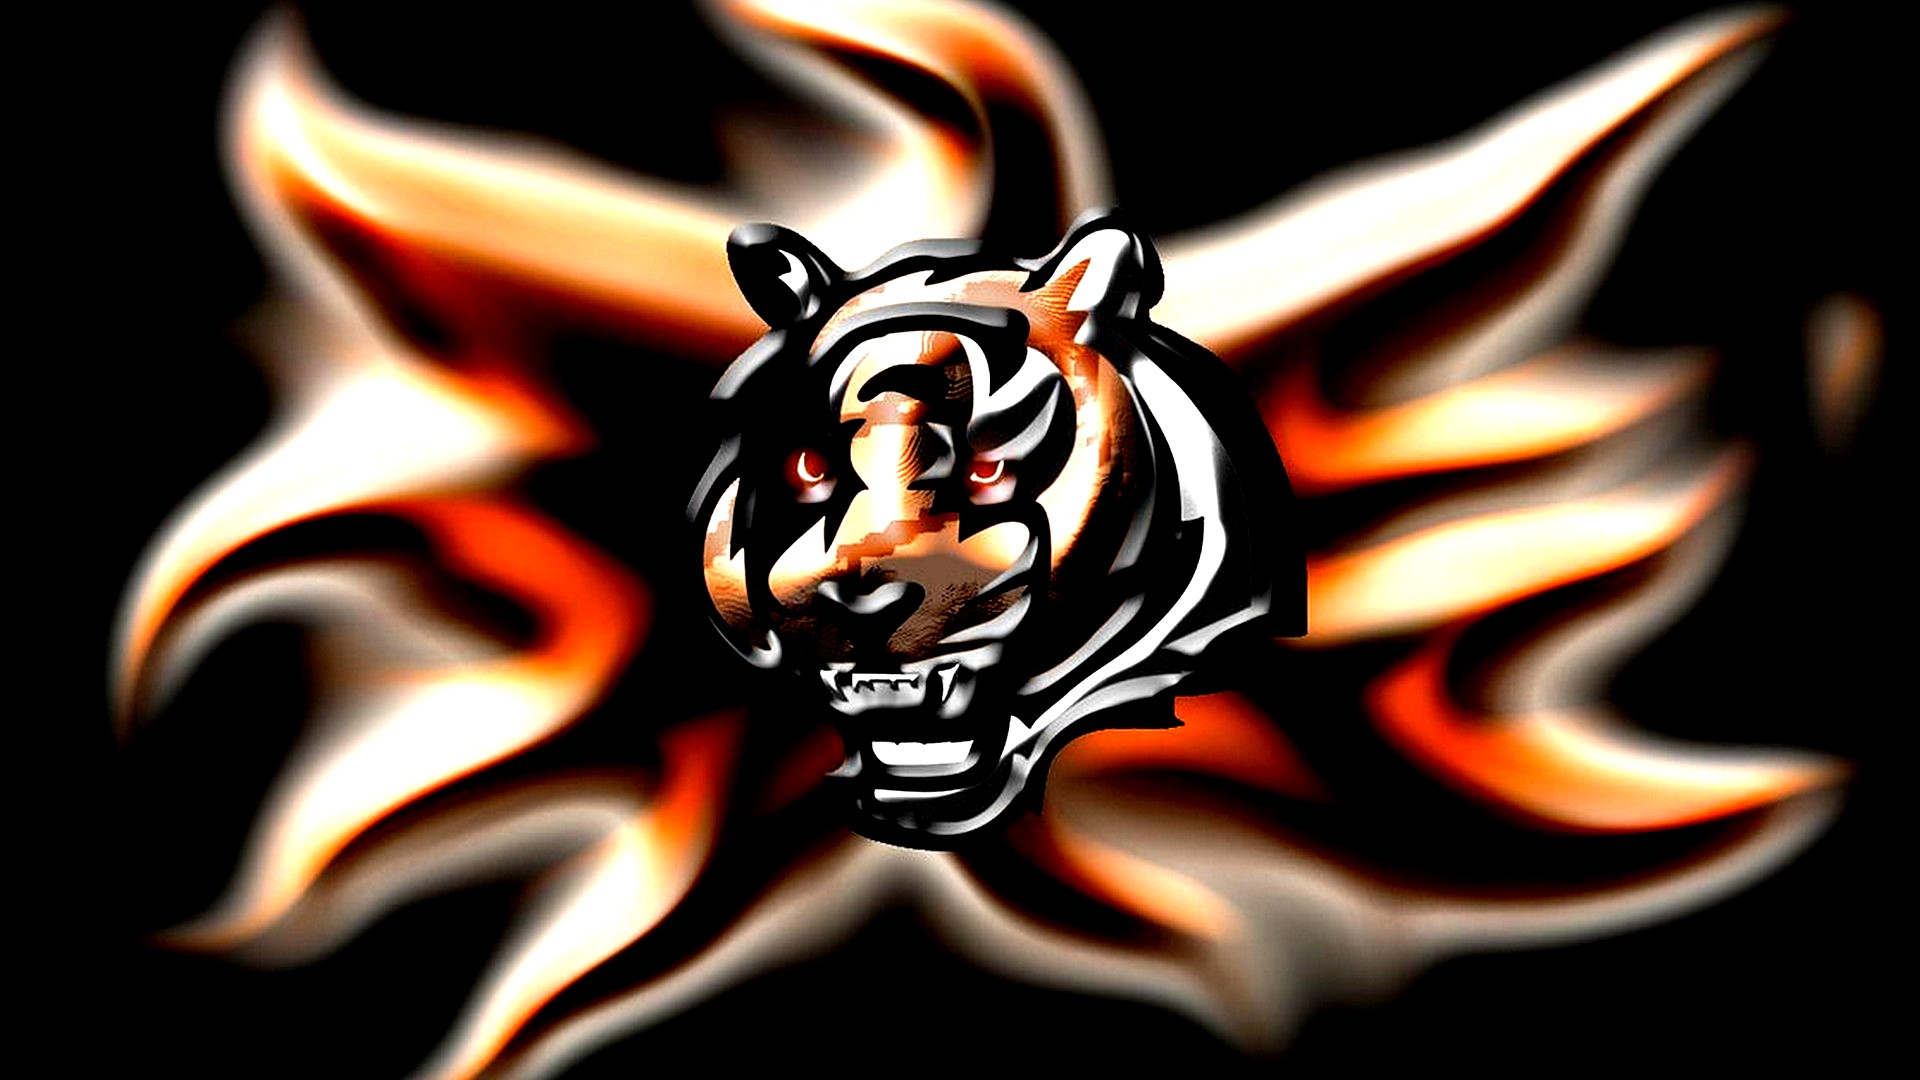 Cincinnati Bengals NFL Desktop Wallpapers with high-resolution 1920x1080 pixel. You can use this wallpaper for your Mac or Windows Desktop Background, iPhone, Android or Tablet and another Smartphone device